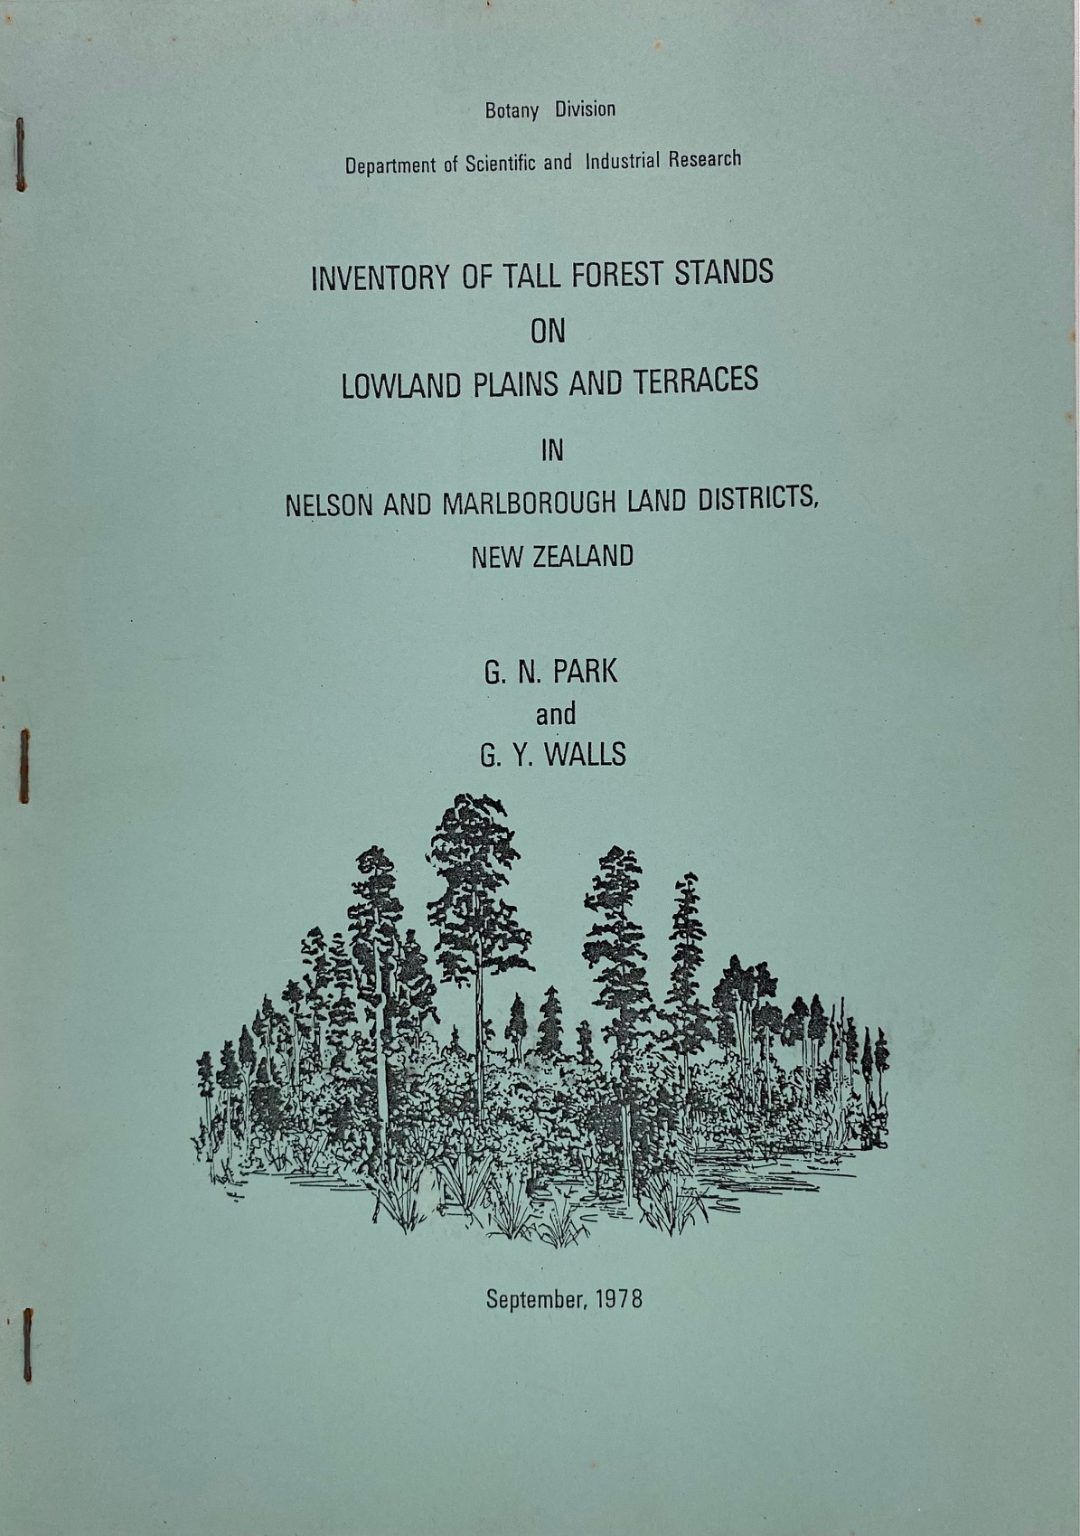 OLD REPORT: Inventory of Tall Forest Stands in Nelson and Marlborough Districts